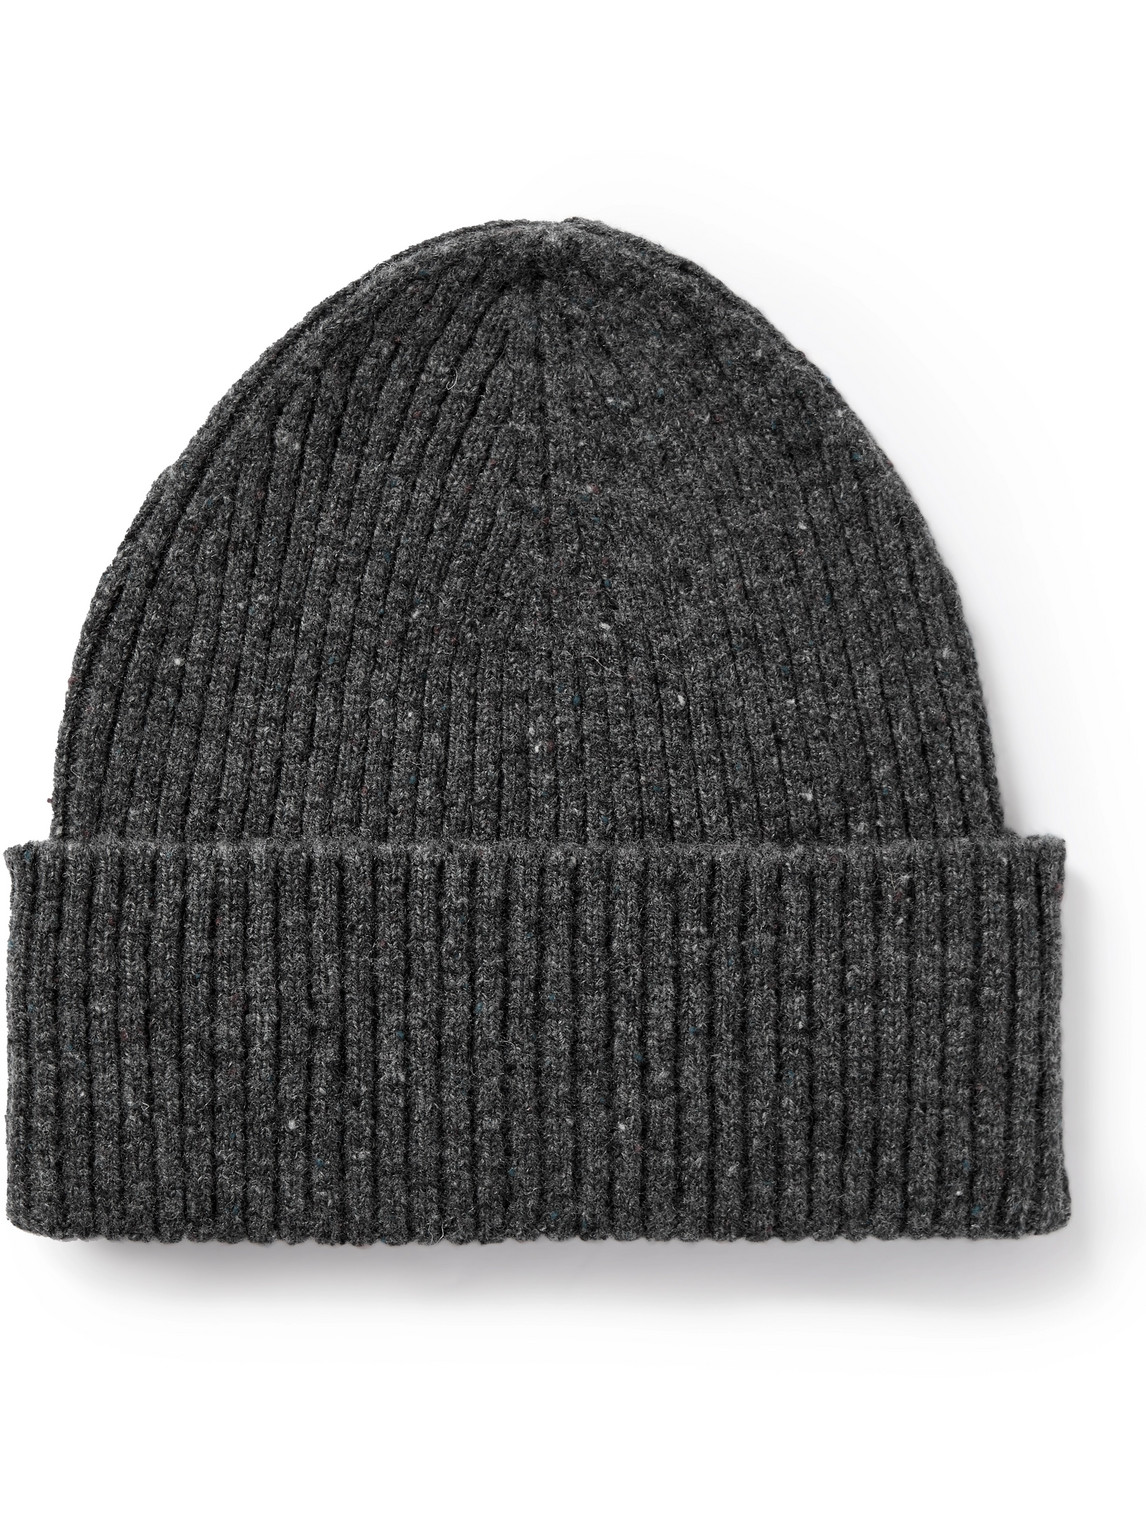 NORSE PROJECTS RIBBED DONEGAL WOOL BEANIE